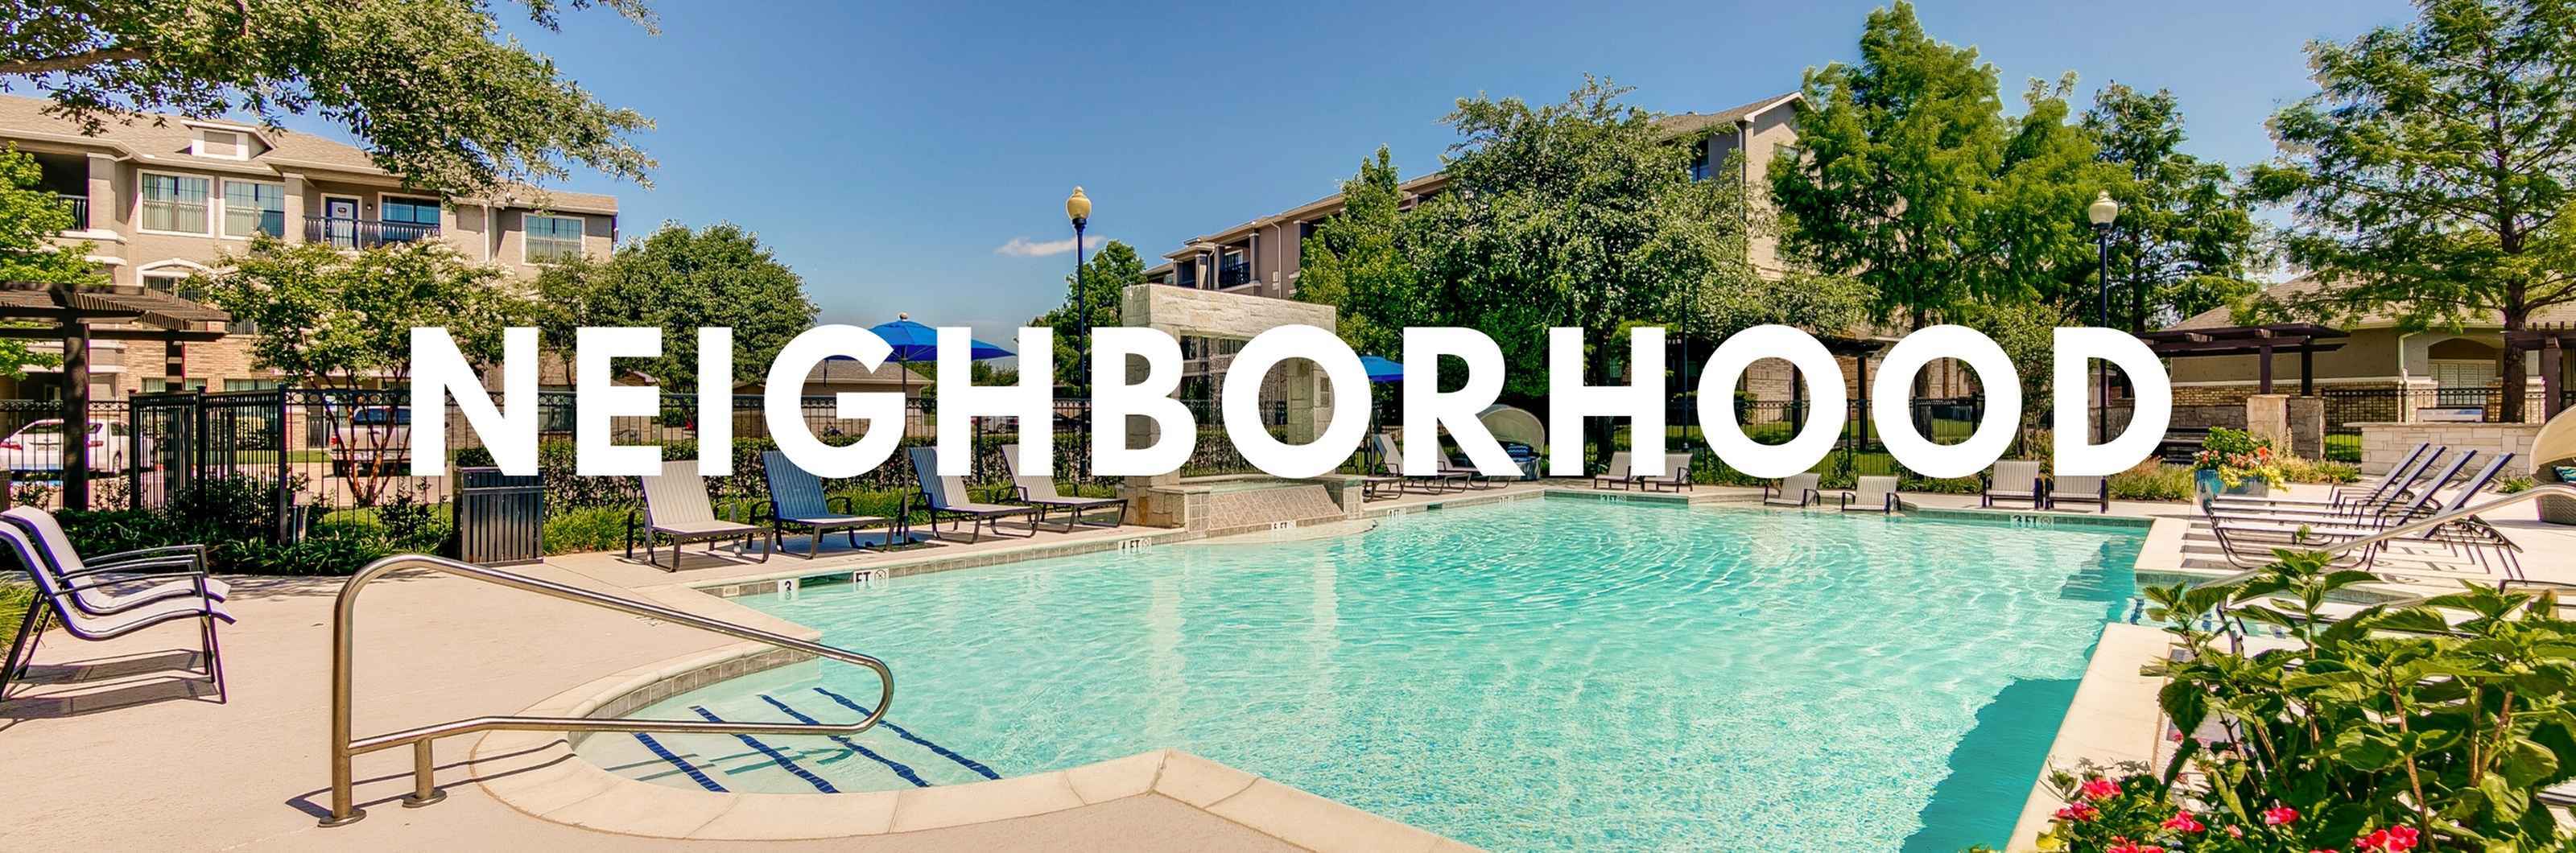 Locations Page Banner Ideally situated near the I-35 Expressway for convenient access to wherever your heading in Dallas. Be a part of the action with close proximity to entertainment downtown, shopping and delicious eats at Highland Village. 